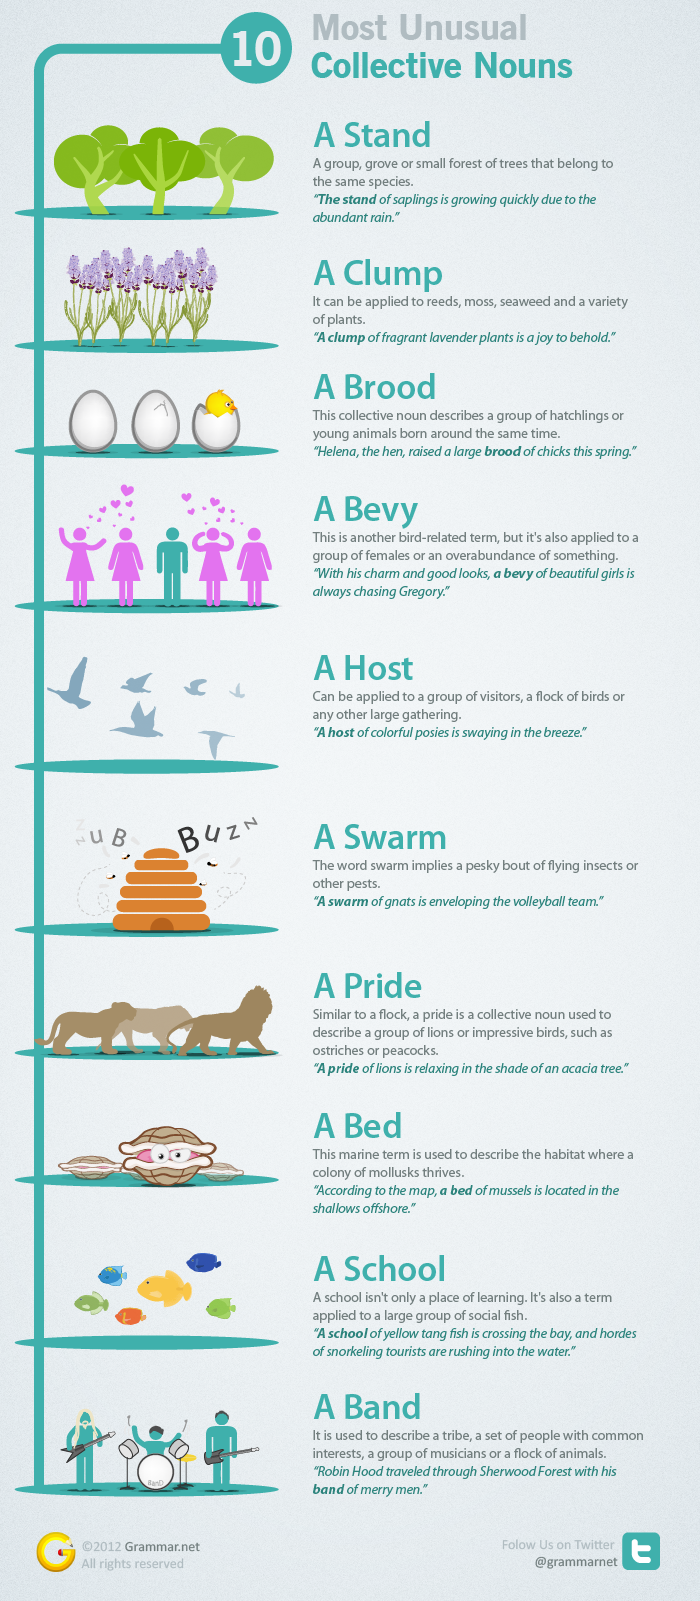 10 Most Unusual Collective Nouns – an infographic | English with a Twist